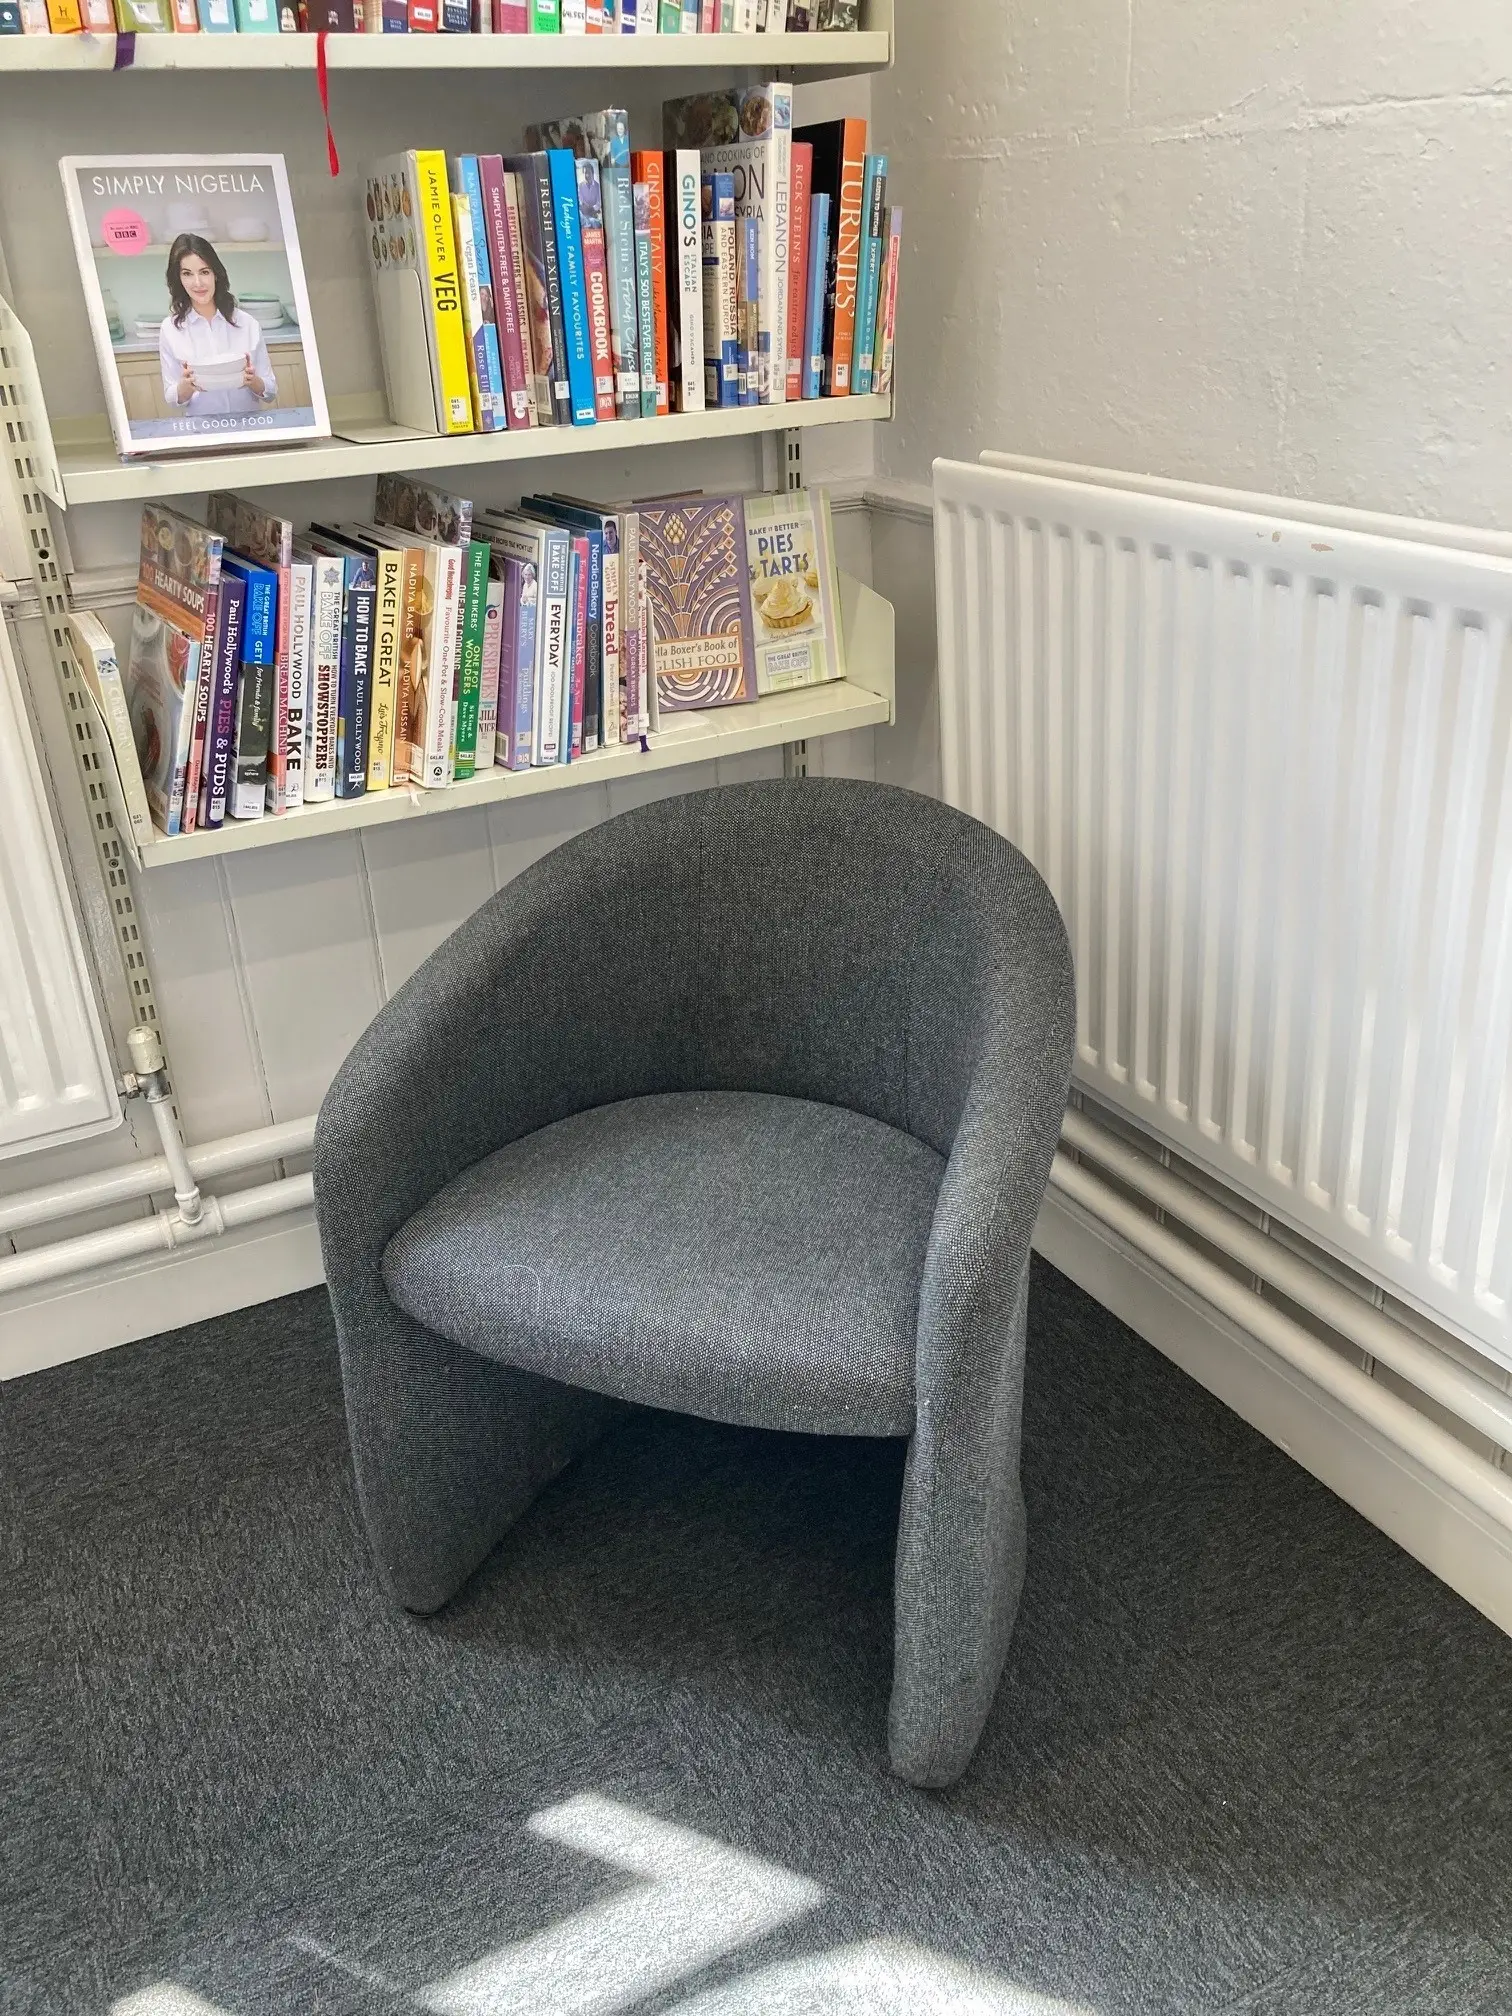 This is a picture of a grey chair in front of shelving unit with books on.  There is a radiator to the right.